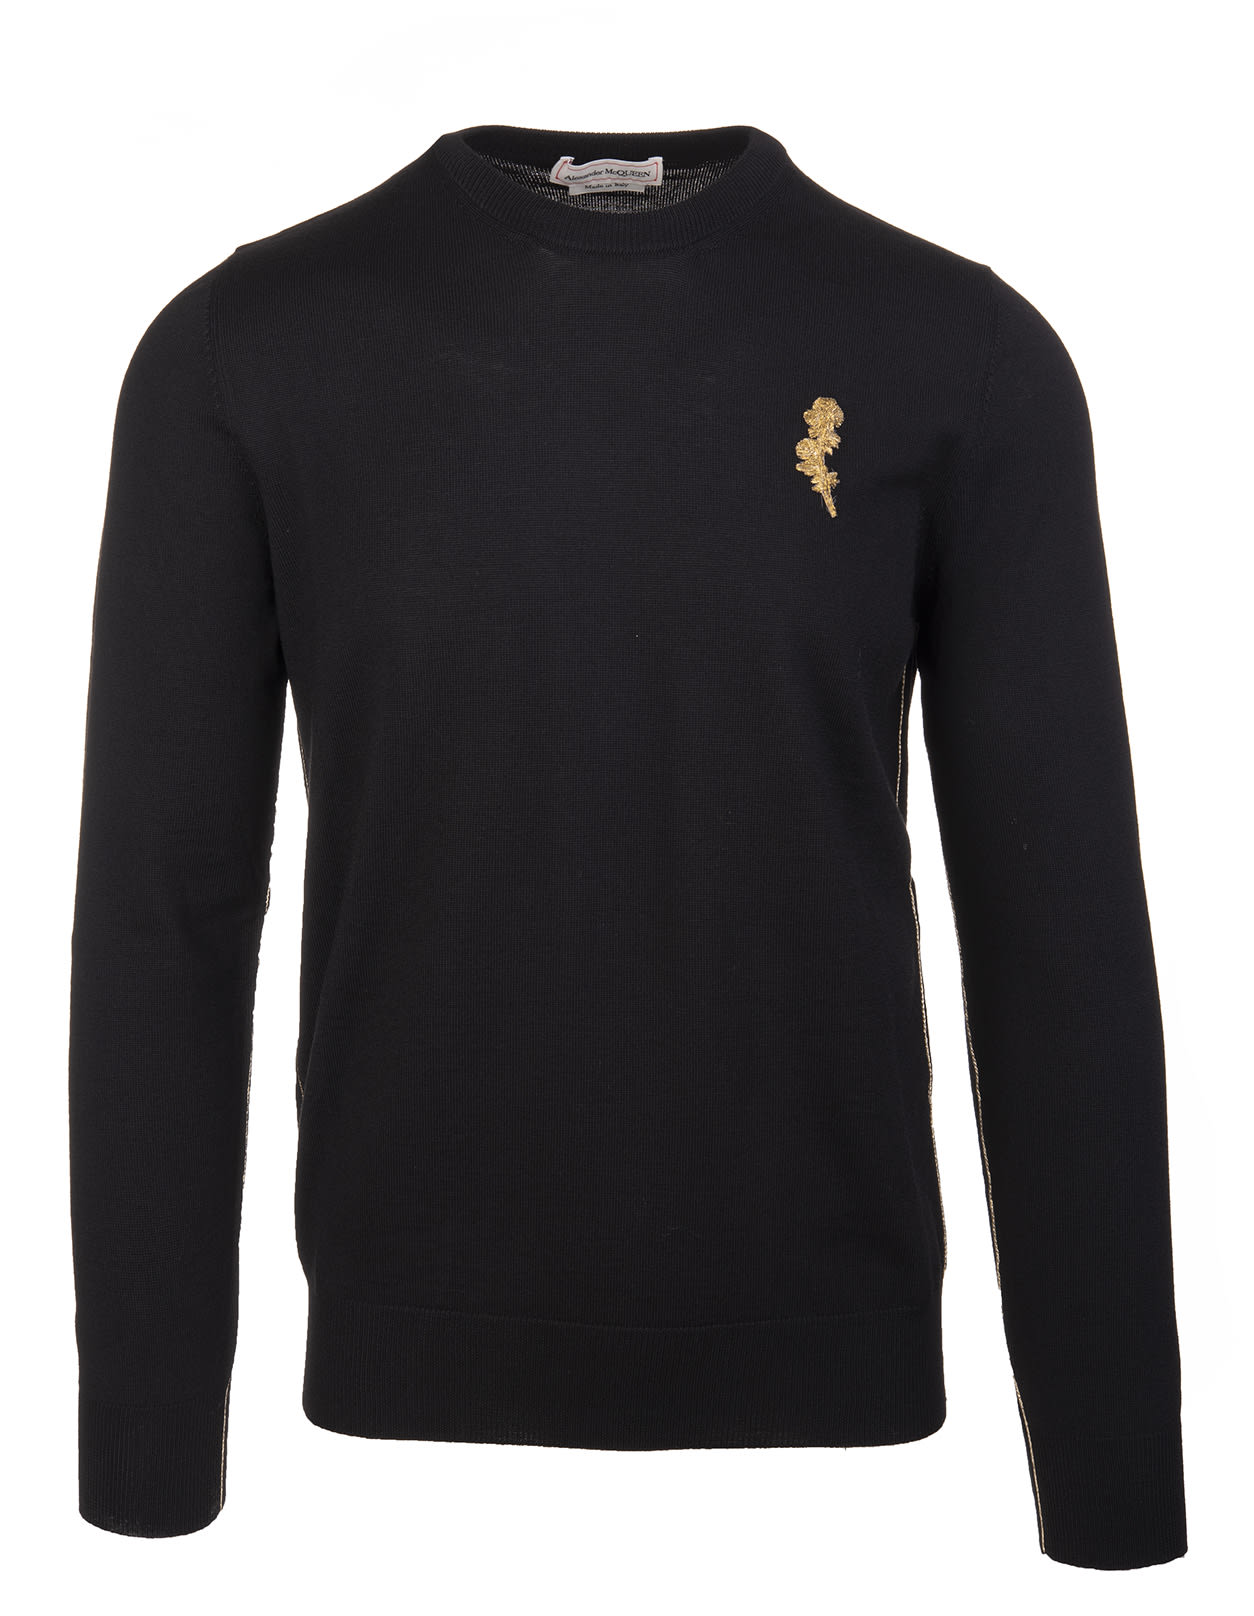 Alexander McQueen Man Black Sweater With Gold Thistle Embroidery